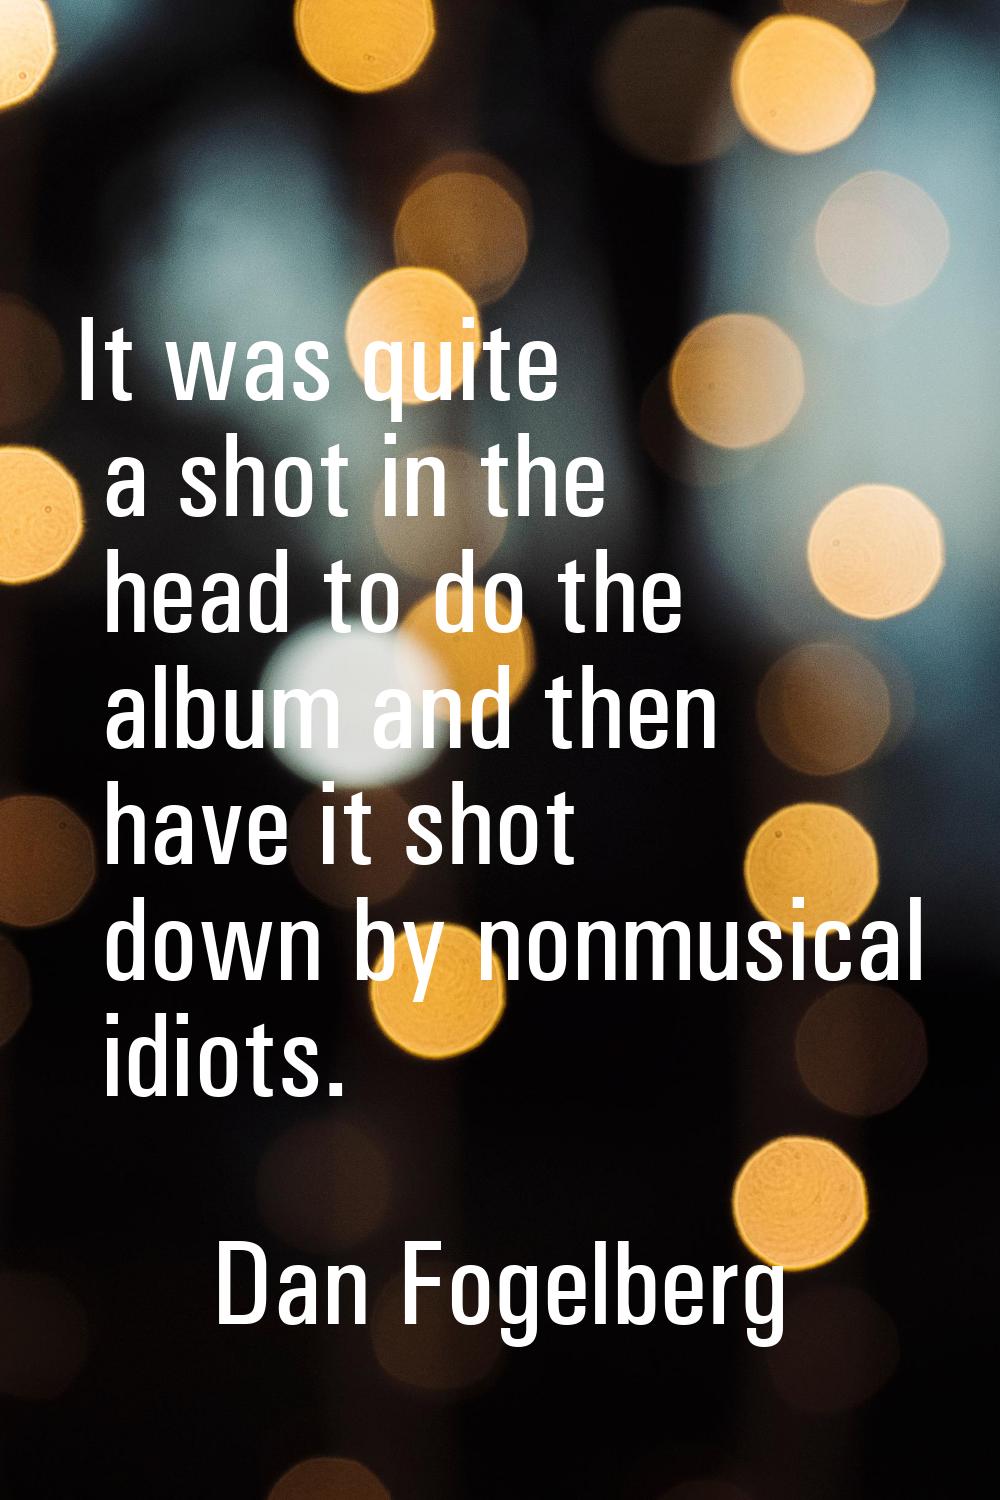 It was quite a shot in the head to do the album and then have it shot down by nonmusical idiots.